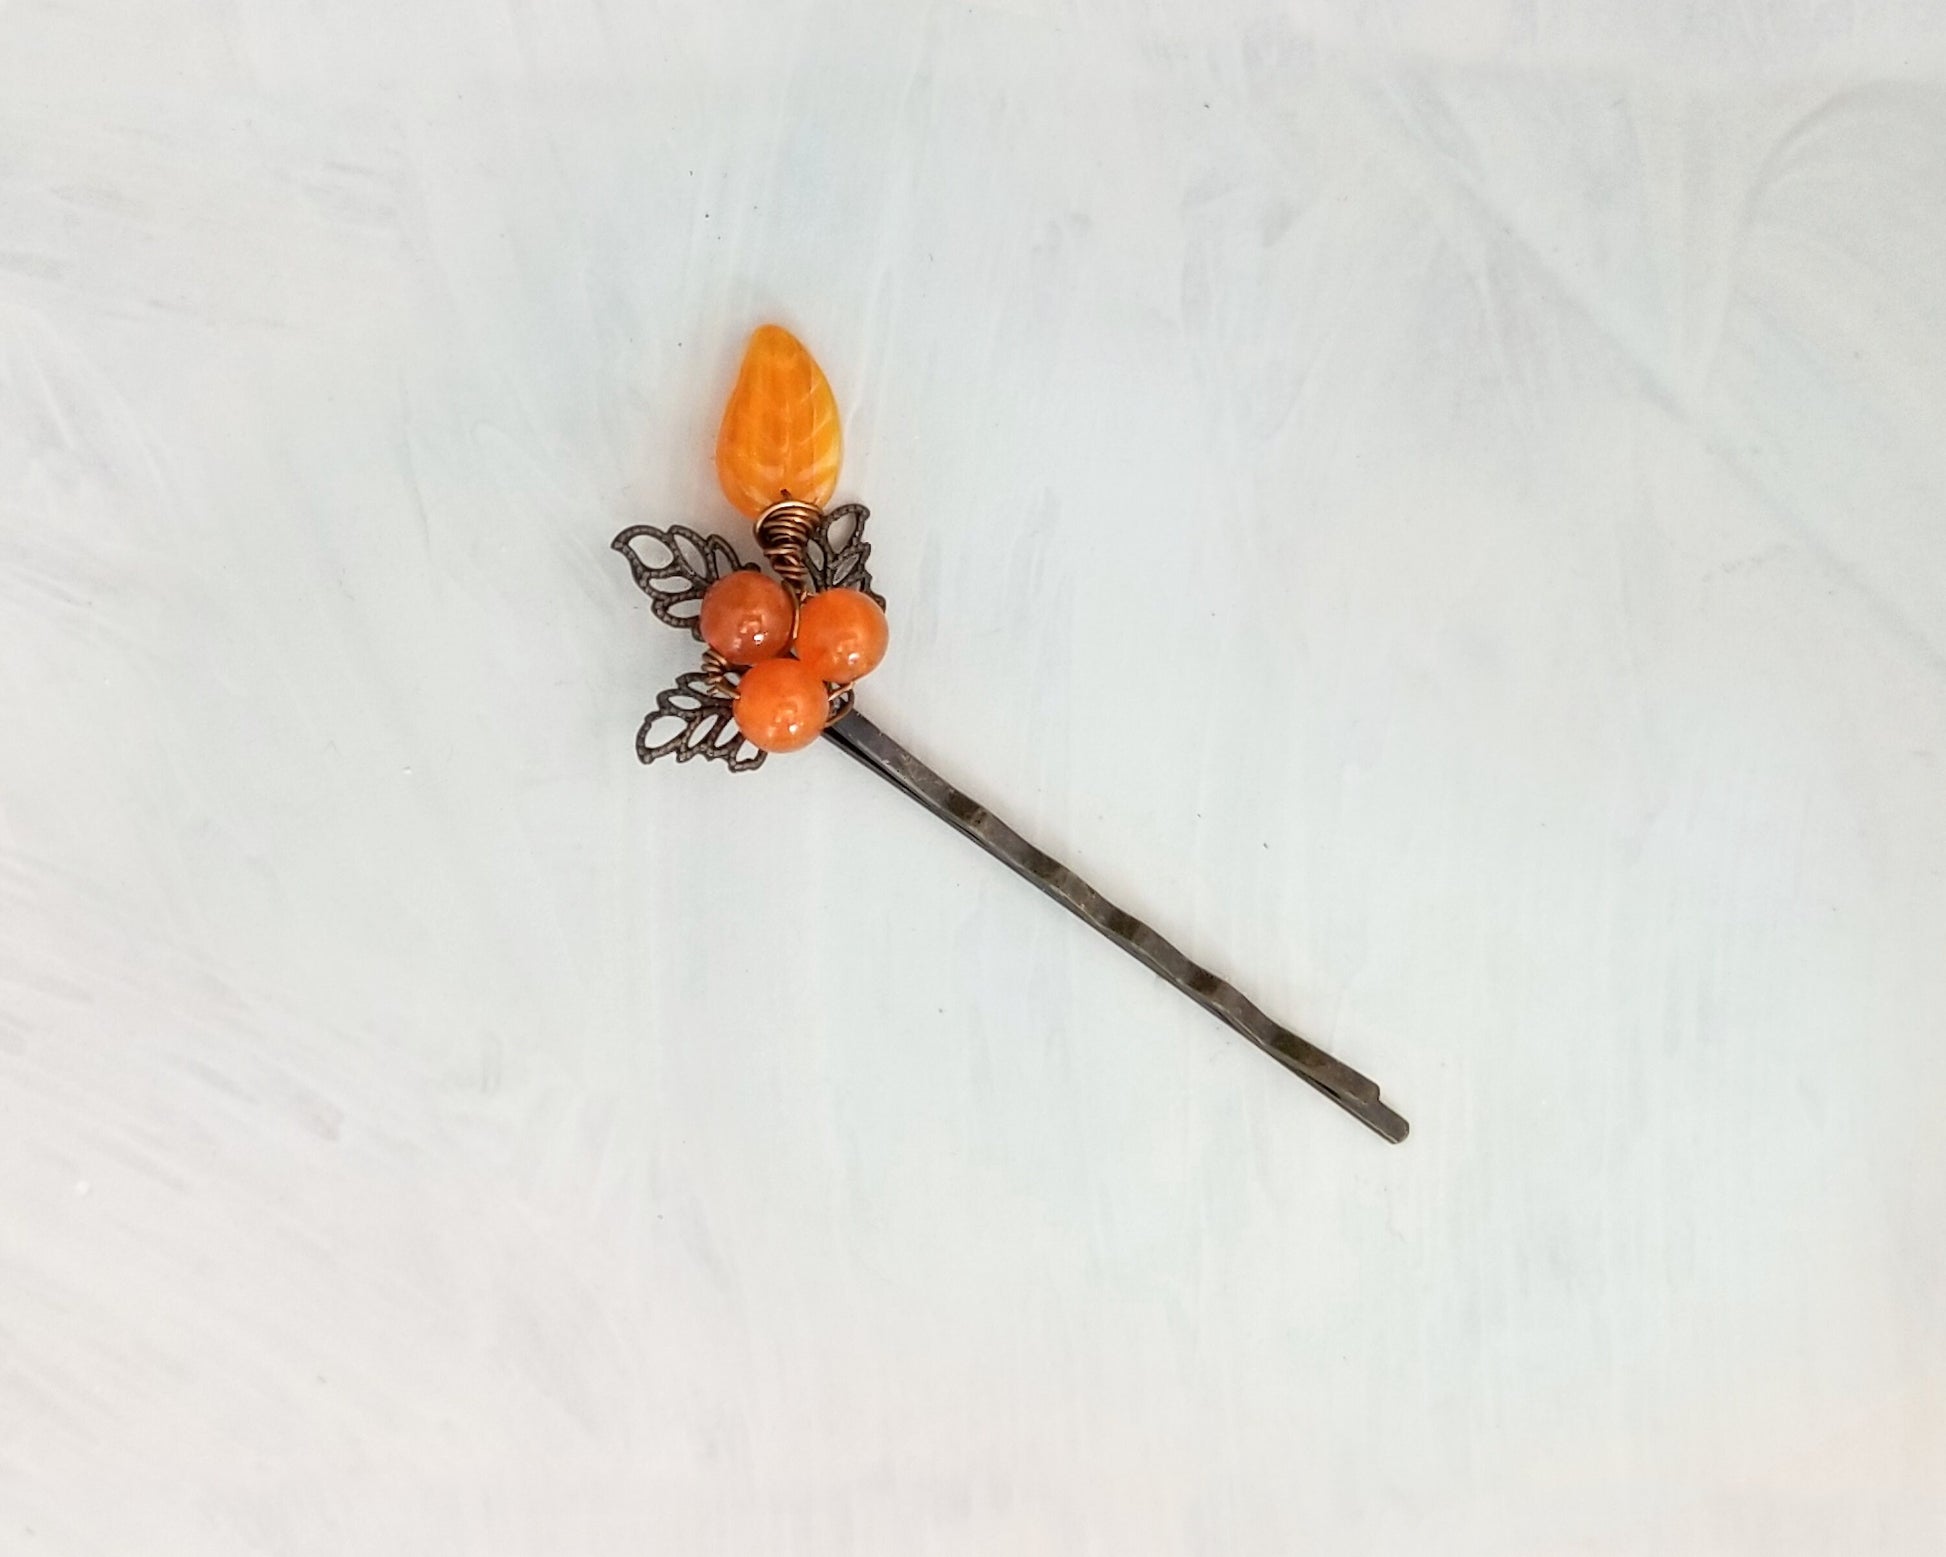 Wire Wrapped Beaded Bobby Pin / Hair Pin in Orange, Bridesmaid, Wedding, Floral, Garden, Party, Boho, Bohemian, Choice of Colors and Metals